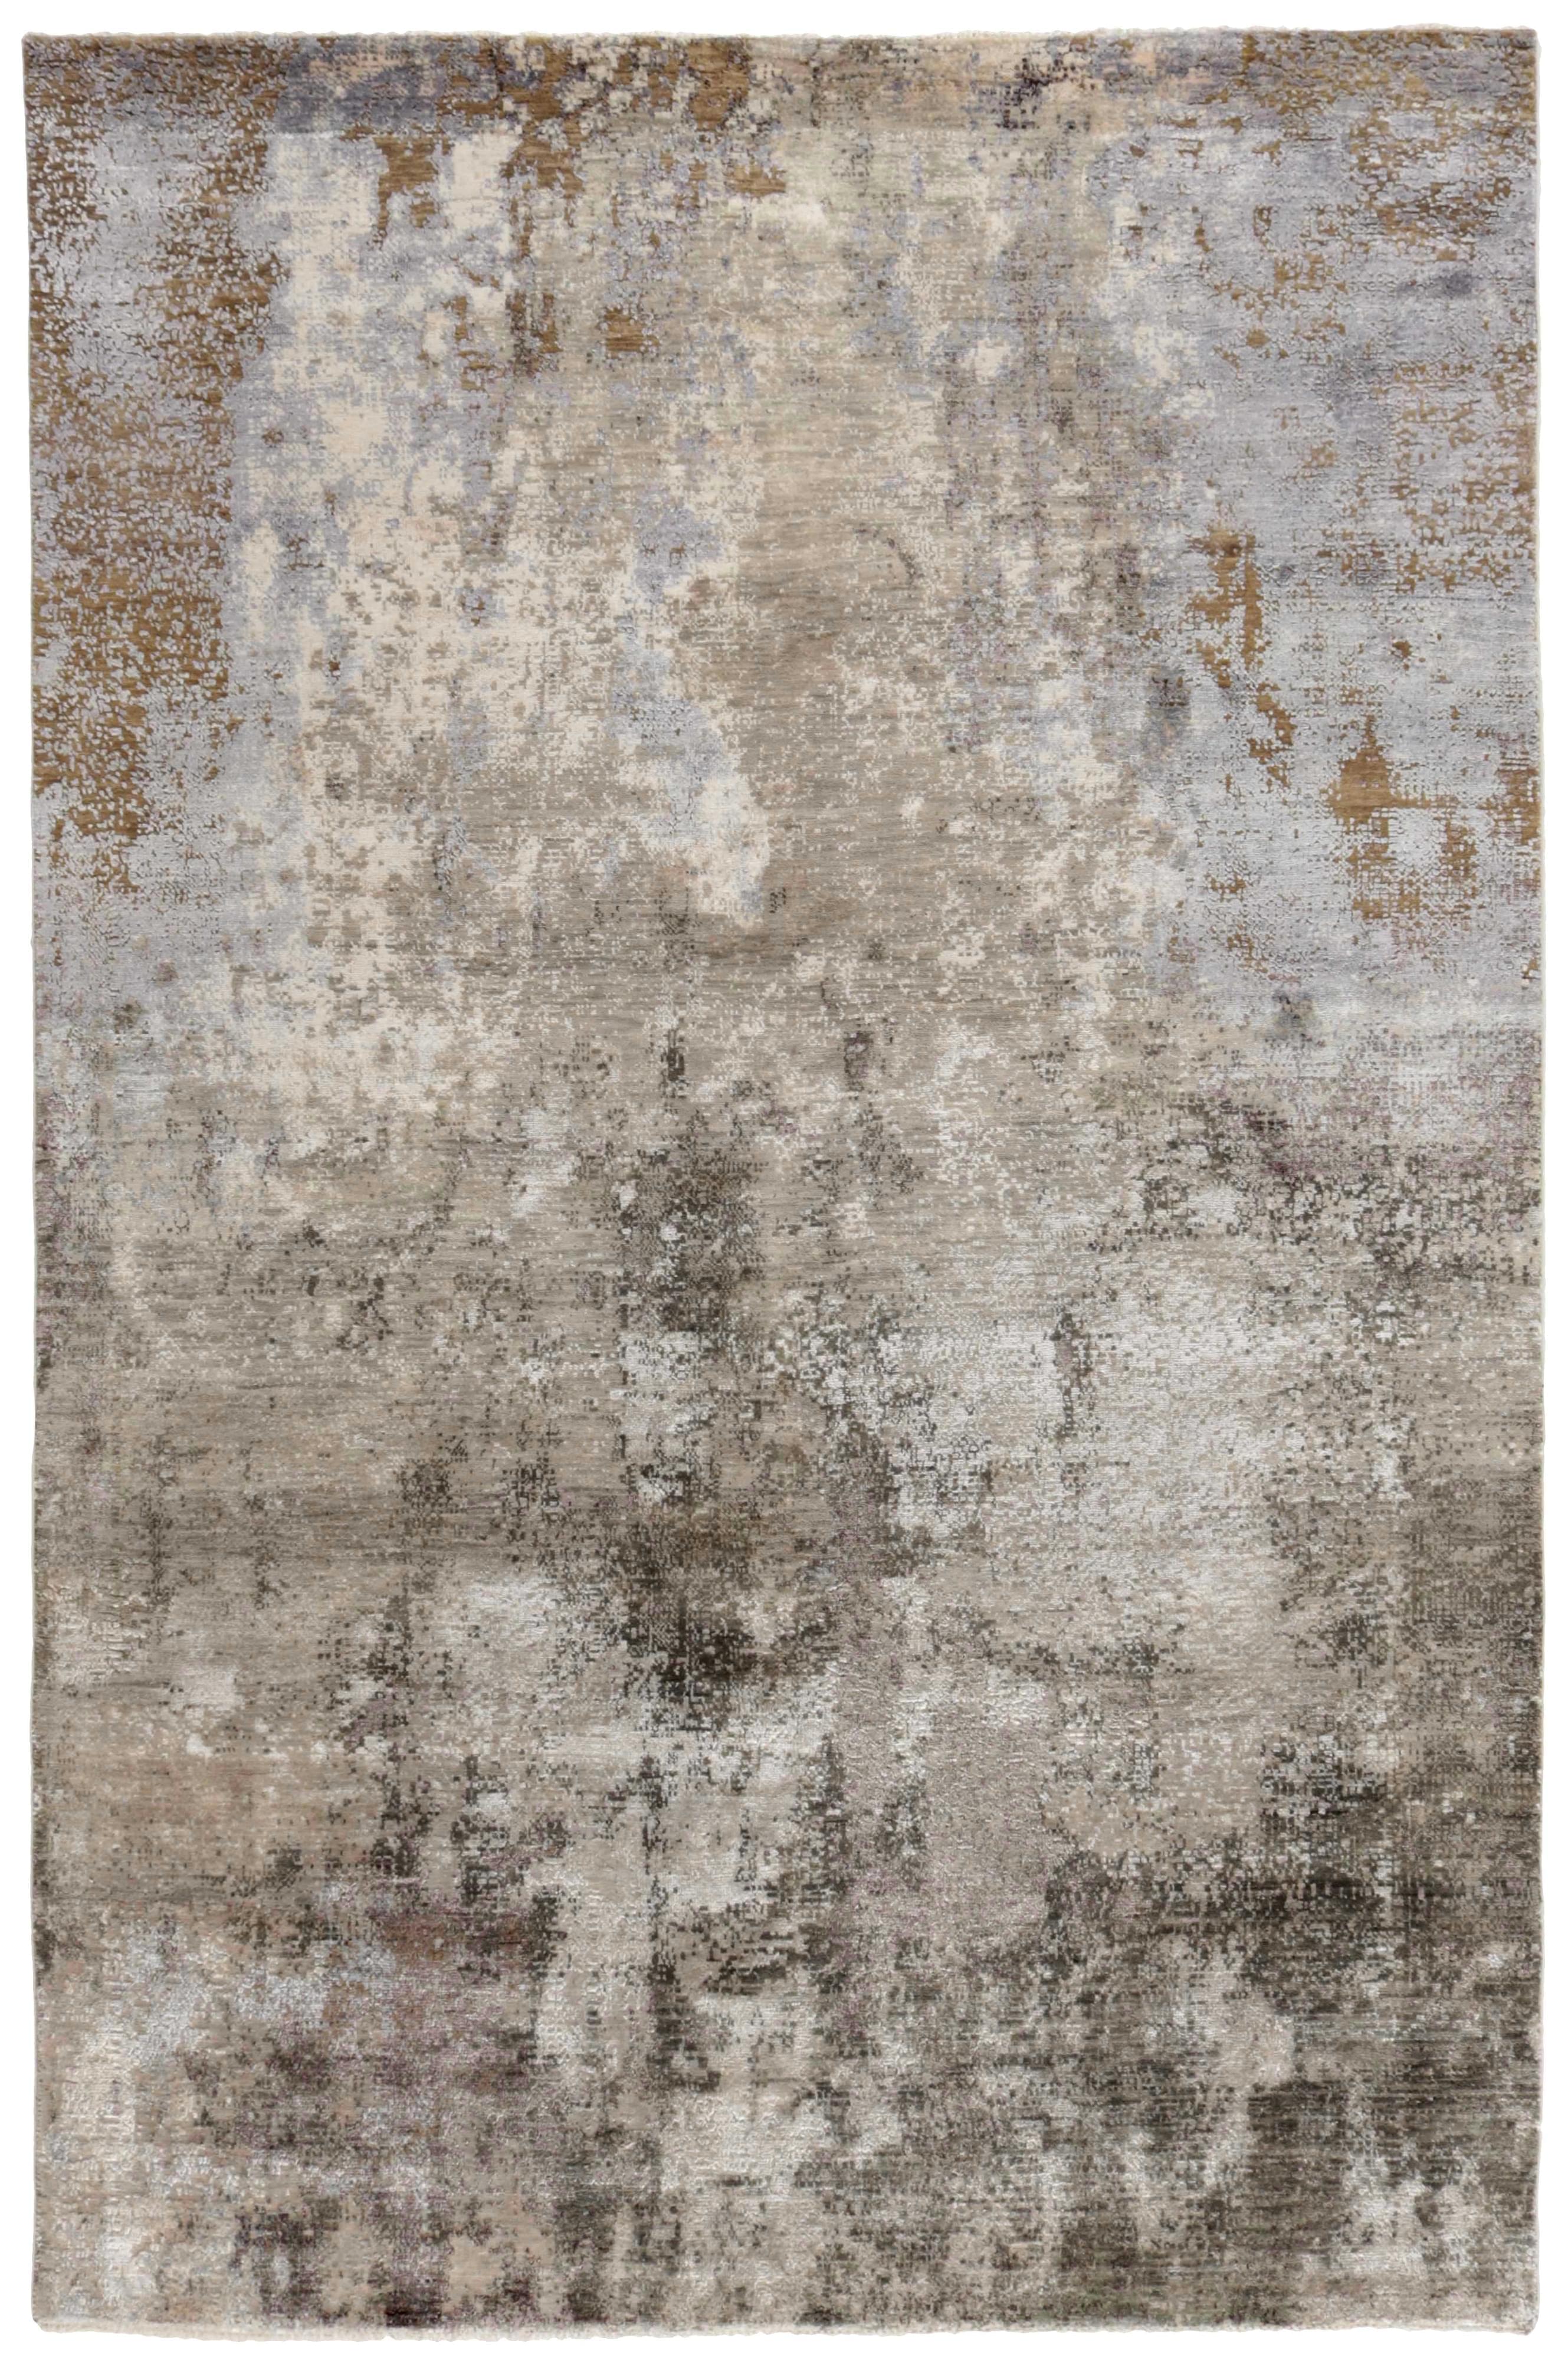 Large area rug with abstract design in grey